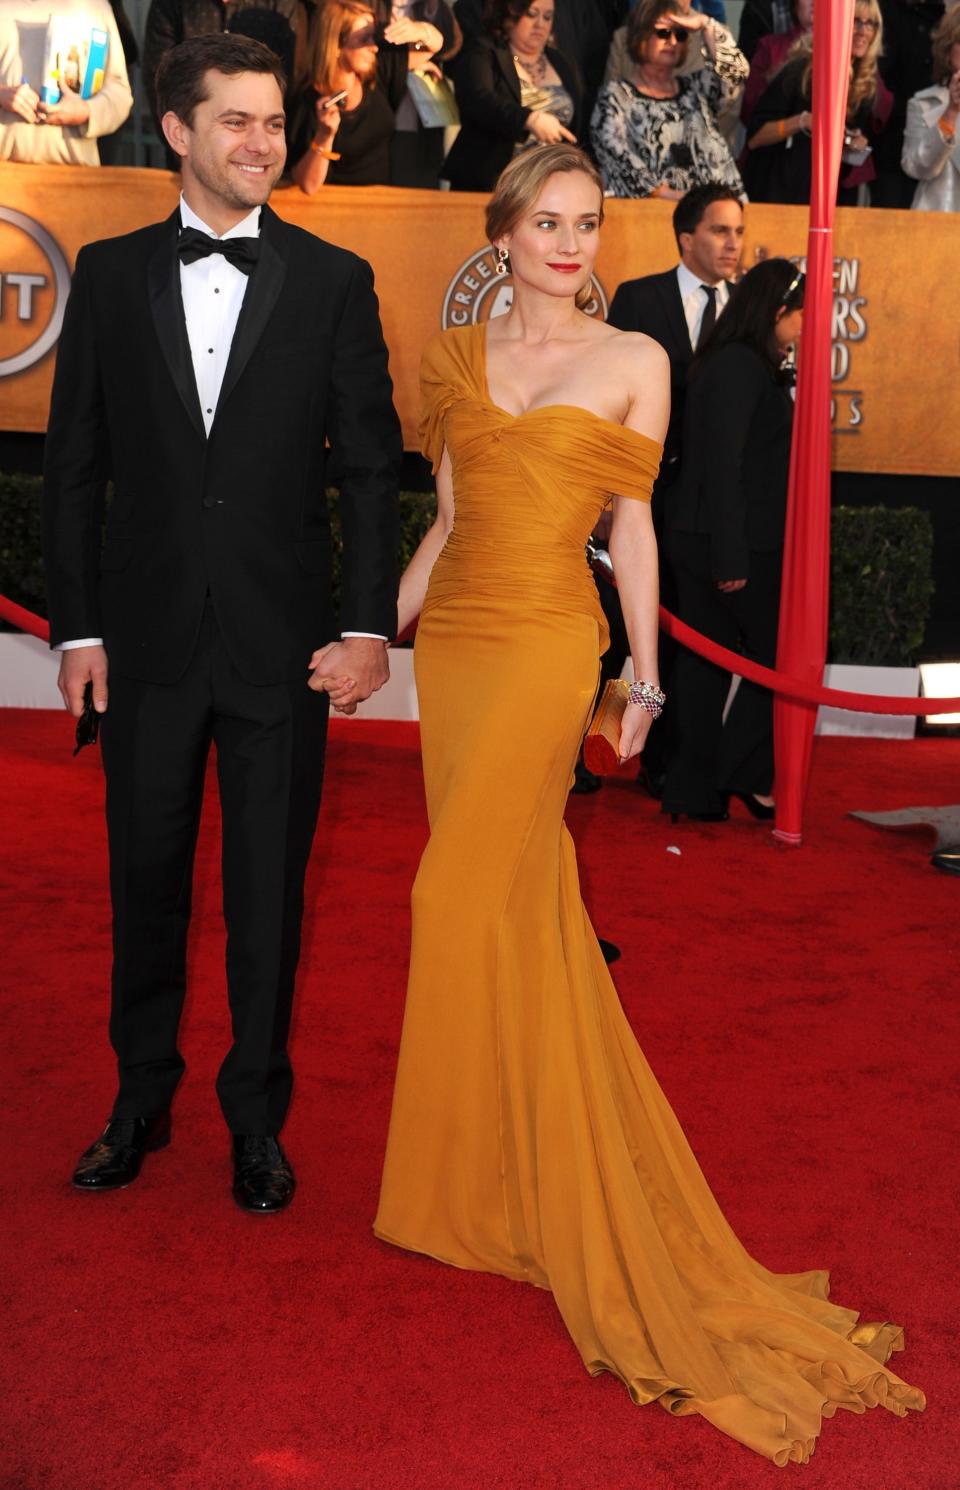 19 Power Couples Who Rocked the Red Carpet at the SAG Awards